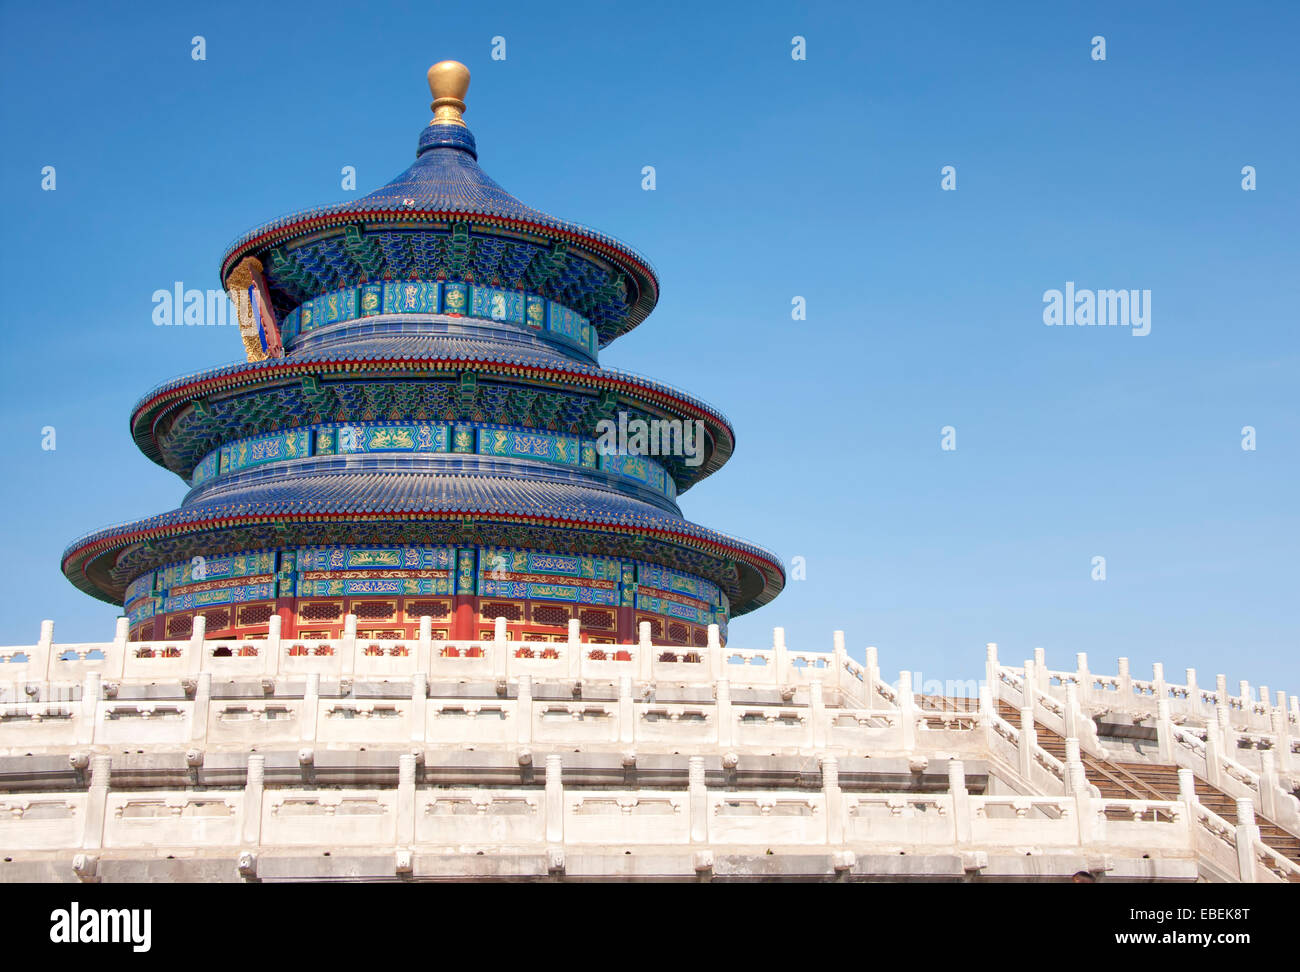 Beijing Temple of Heaven: tower and terrace. Stock Photo